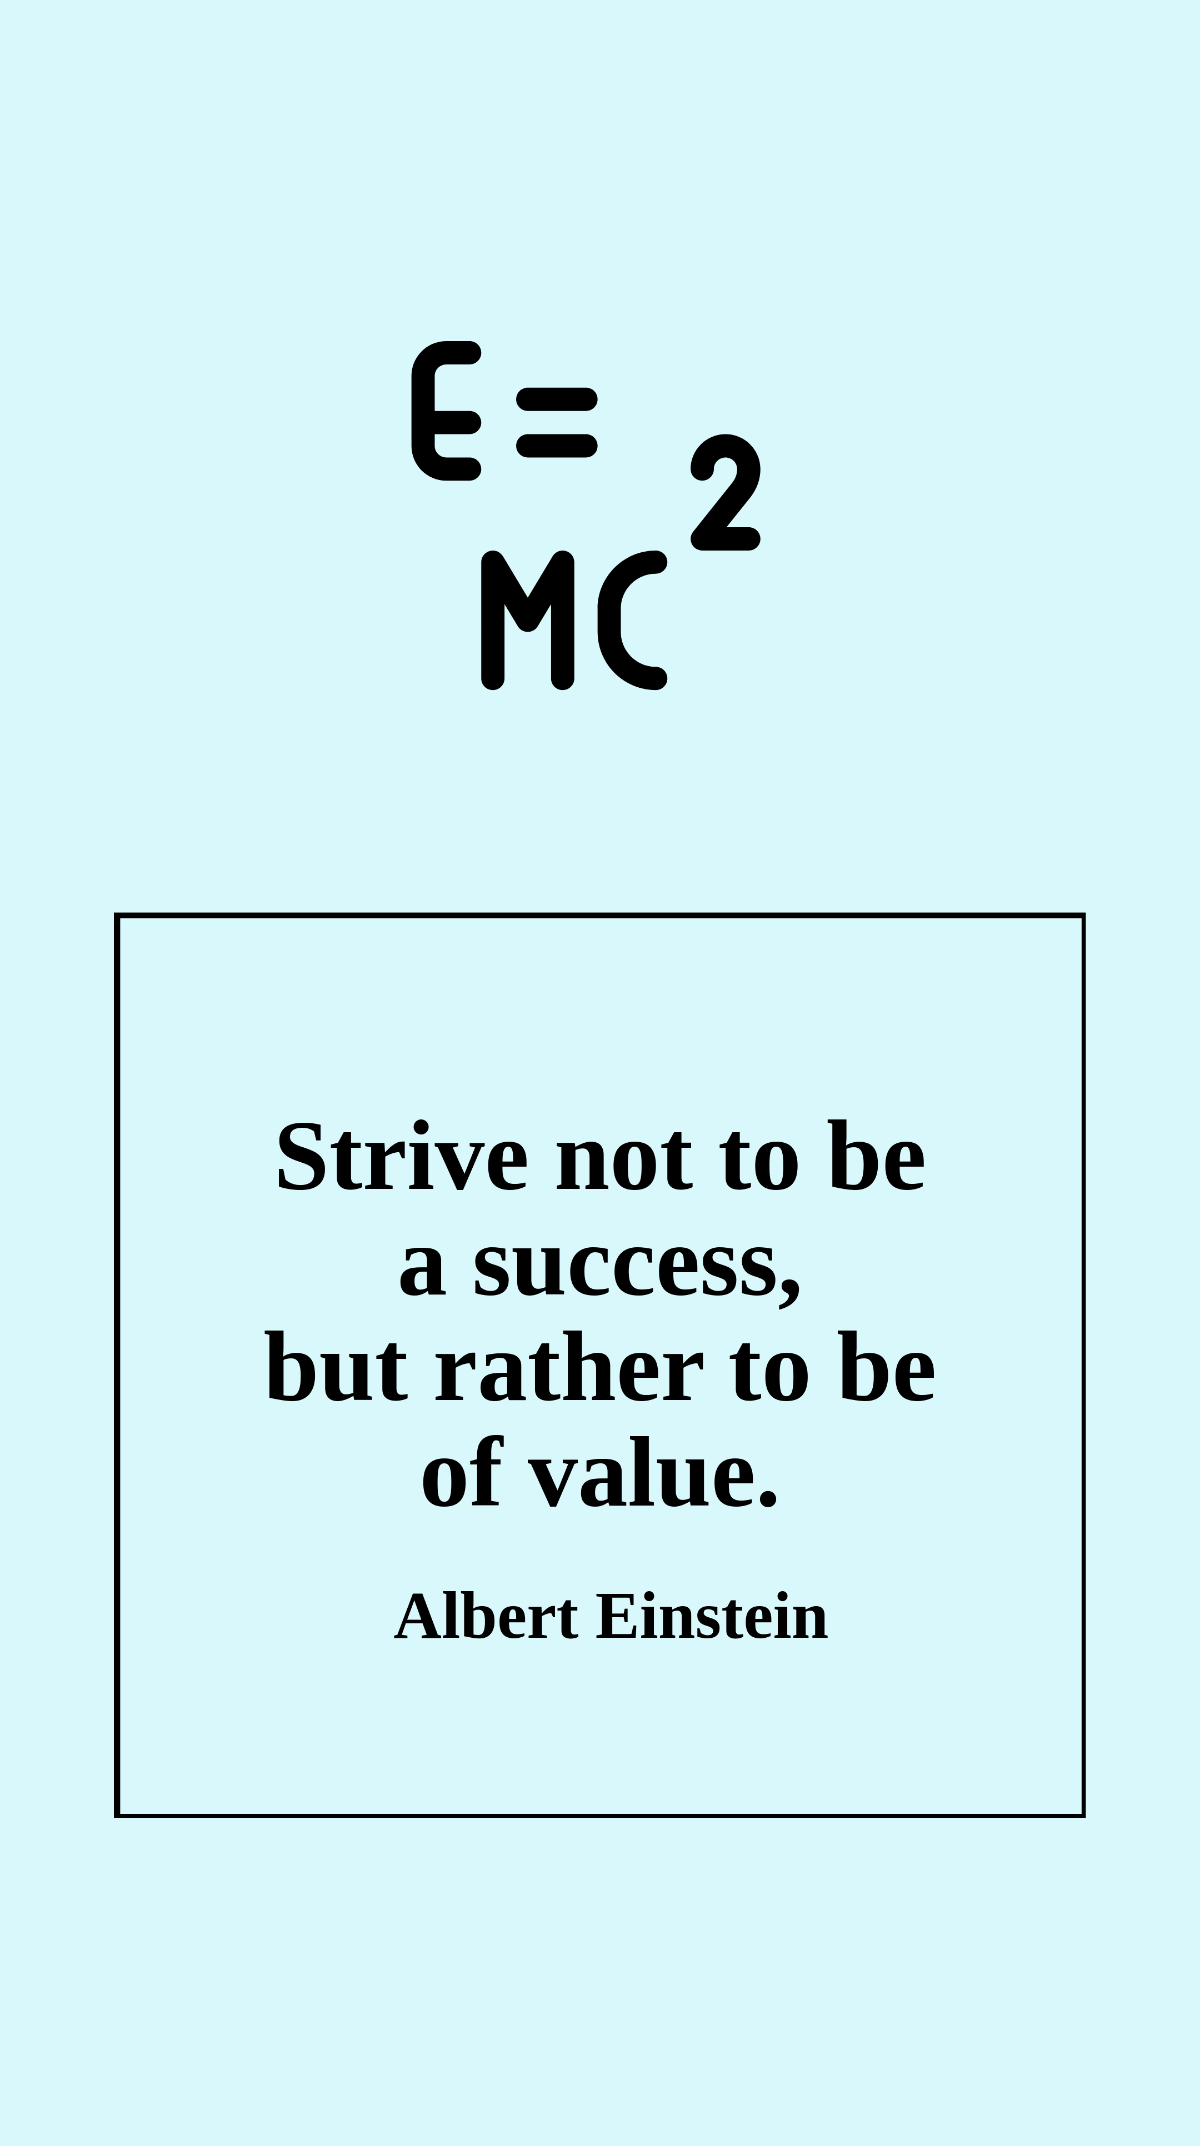 Albert Einstein - Strive not to be a success, but rather to be of value.